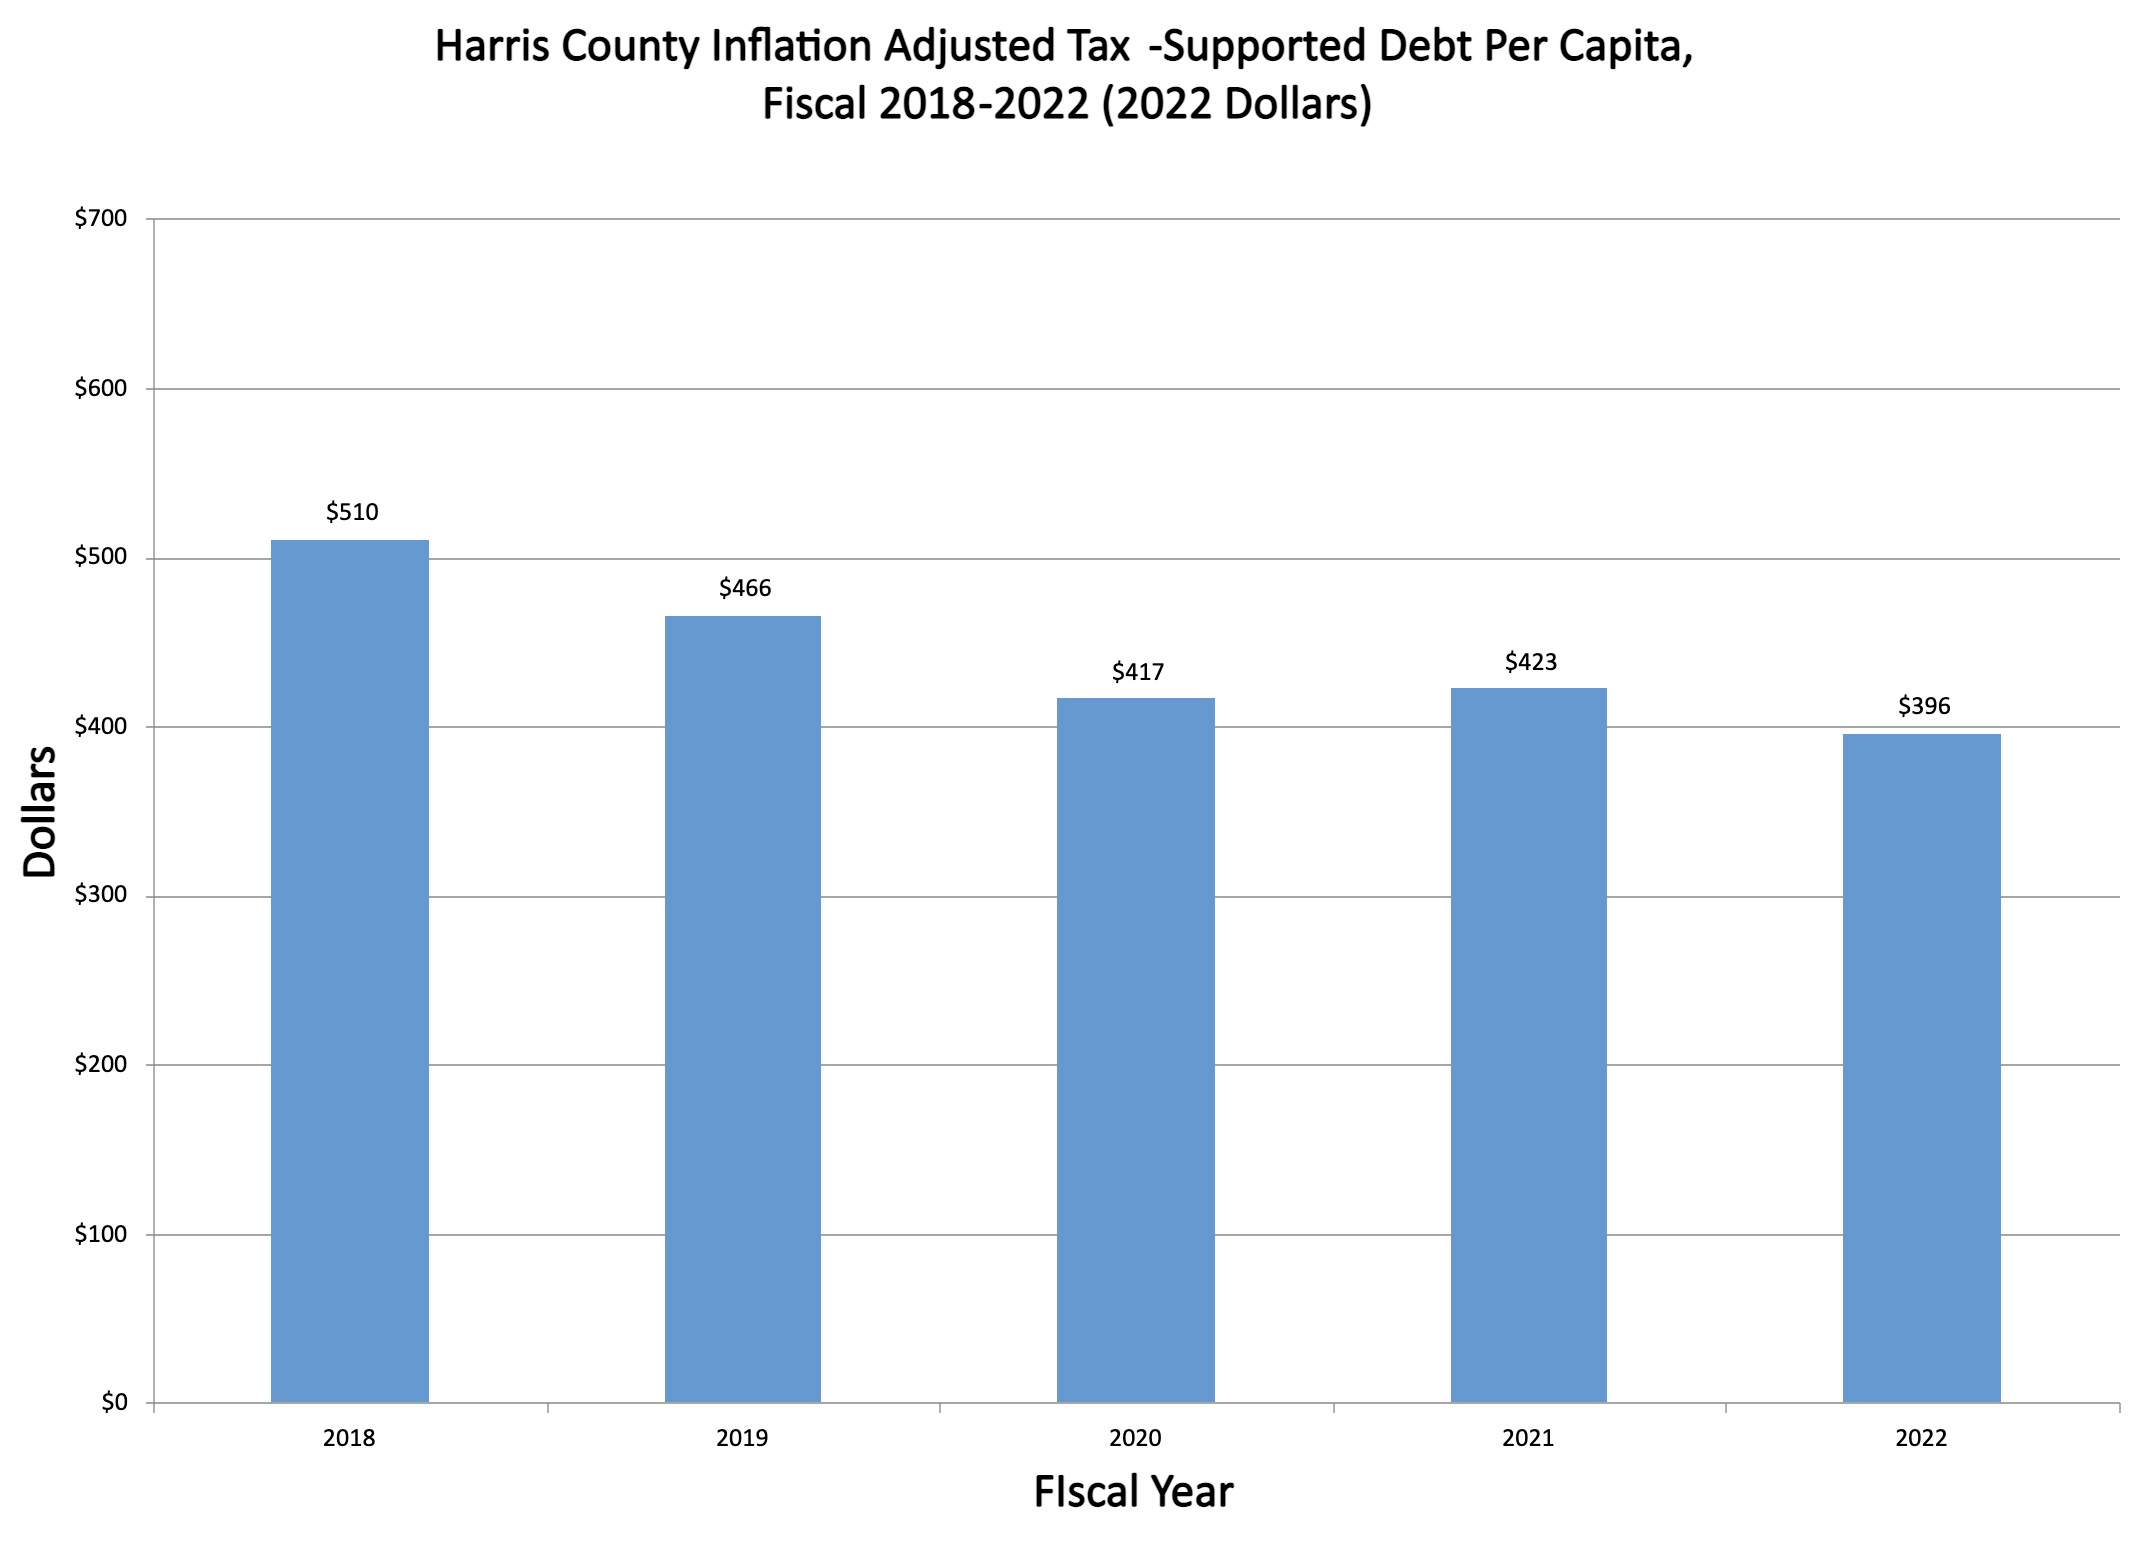 HC Inflation Adjusted Tax-Supported Debt Per Capita,Fiscal 2018-2022 (2022 Dollars)